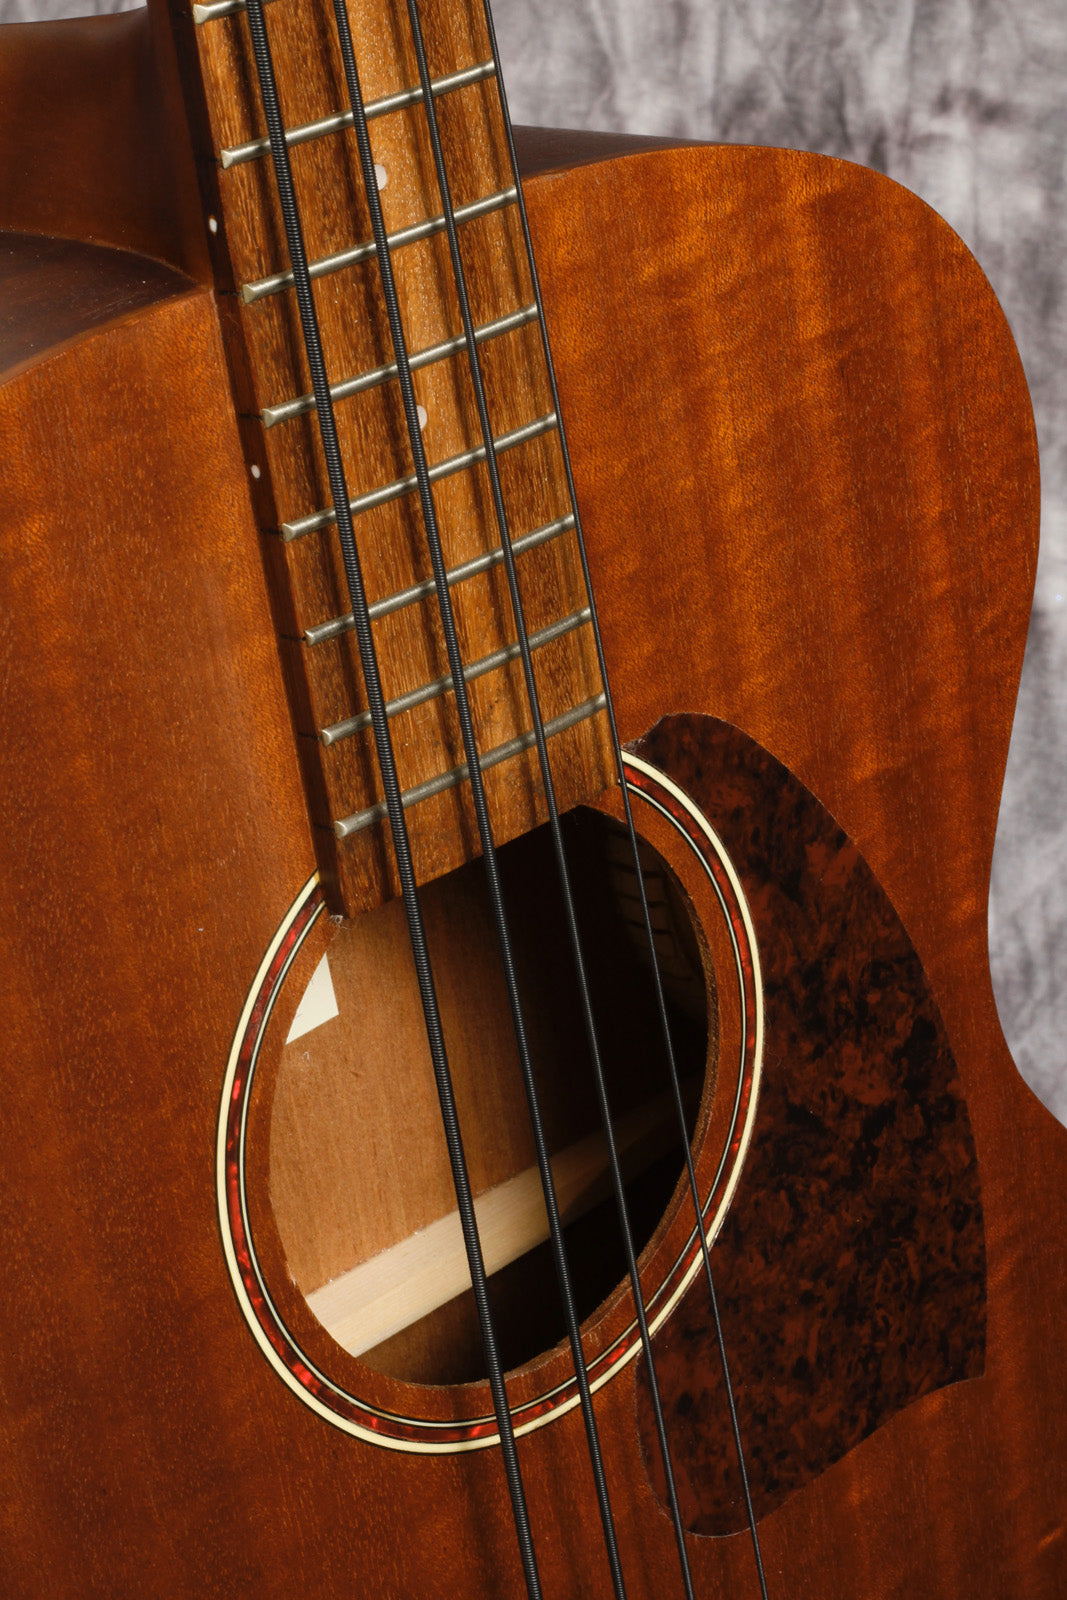 Ibanez PCBE 12 MH - Acoustic Bass